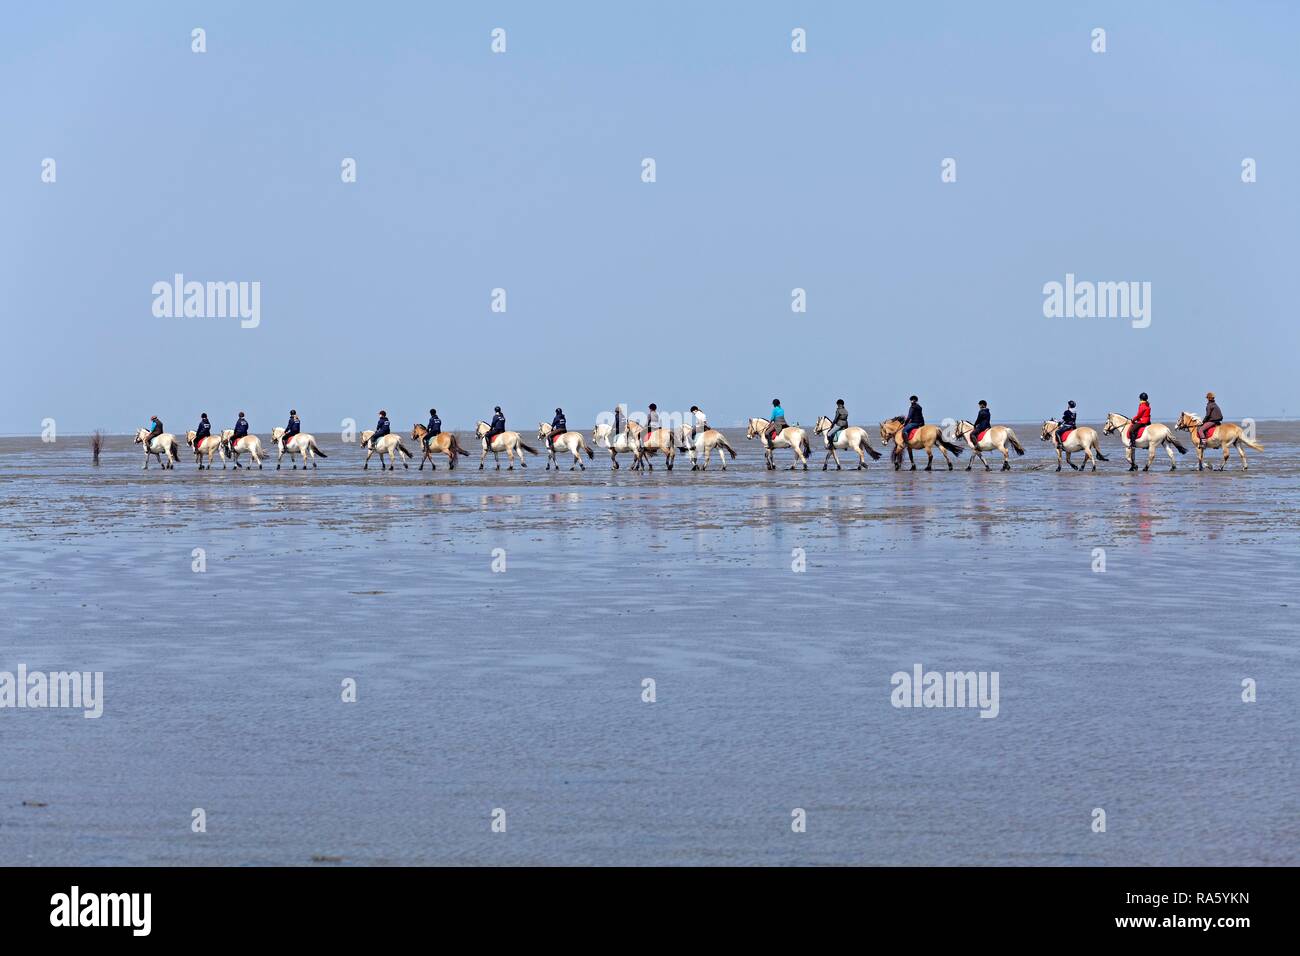 Horseriding in the mudflats, Duhnen, Cuxhaven, Lower Saxony, Germany Stock Photo